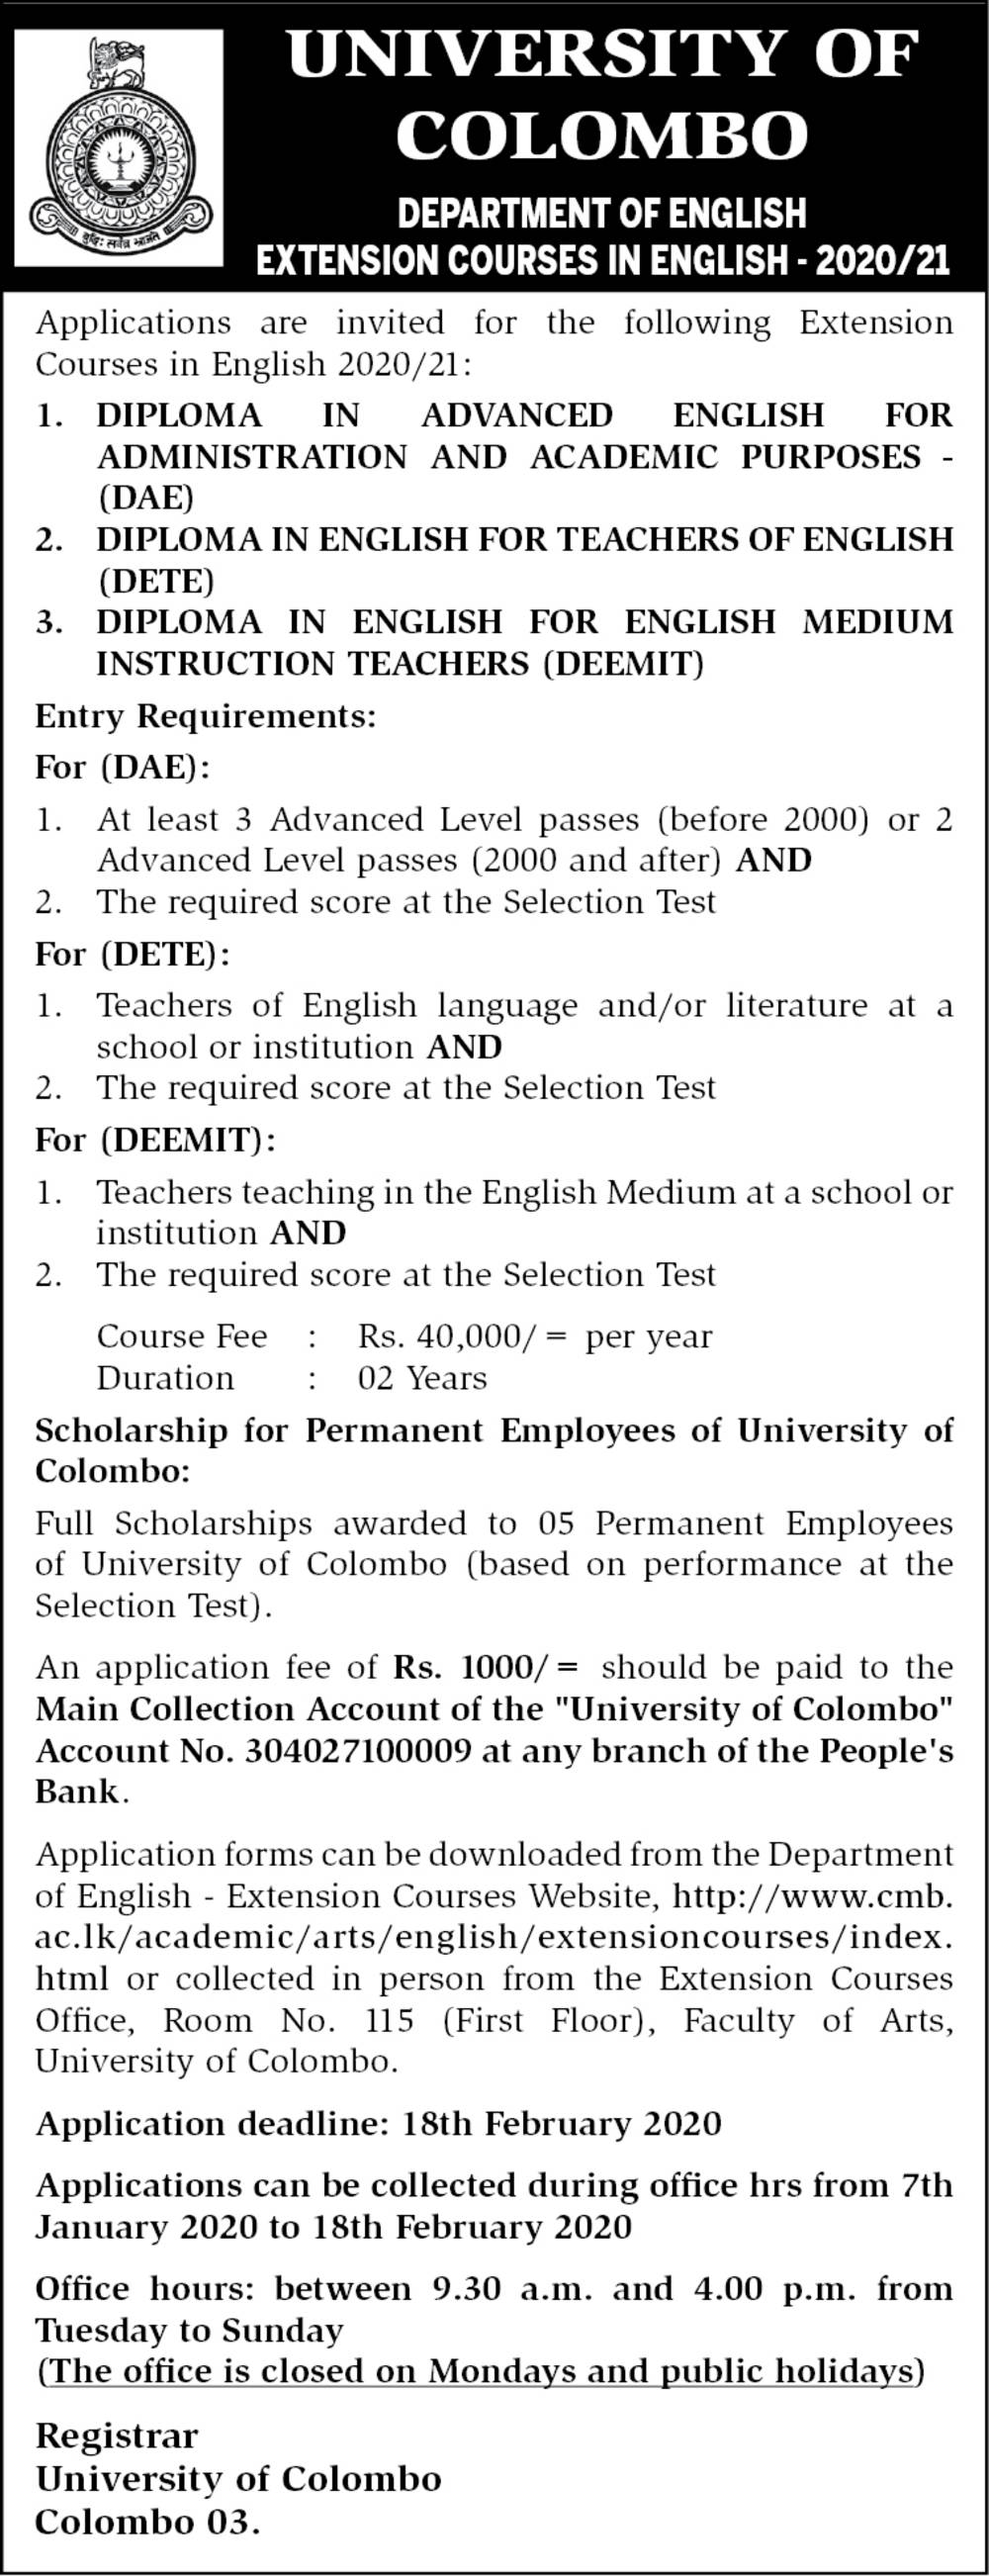 Extension Courses in English - Department of English - University of Colombo